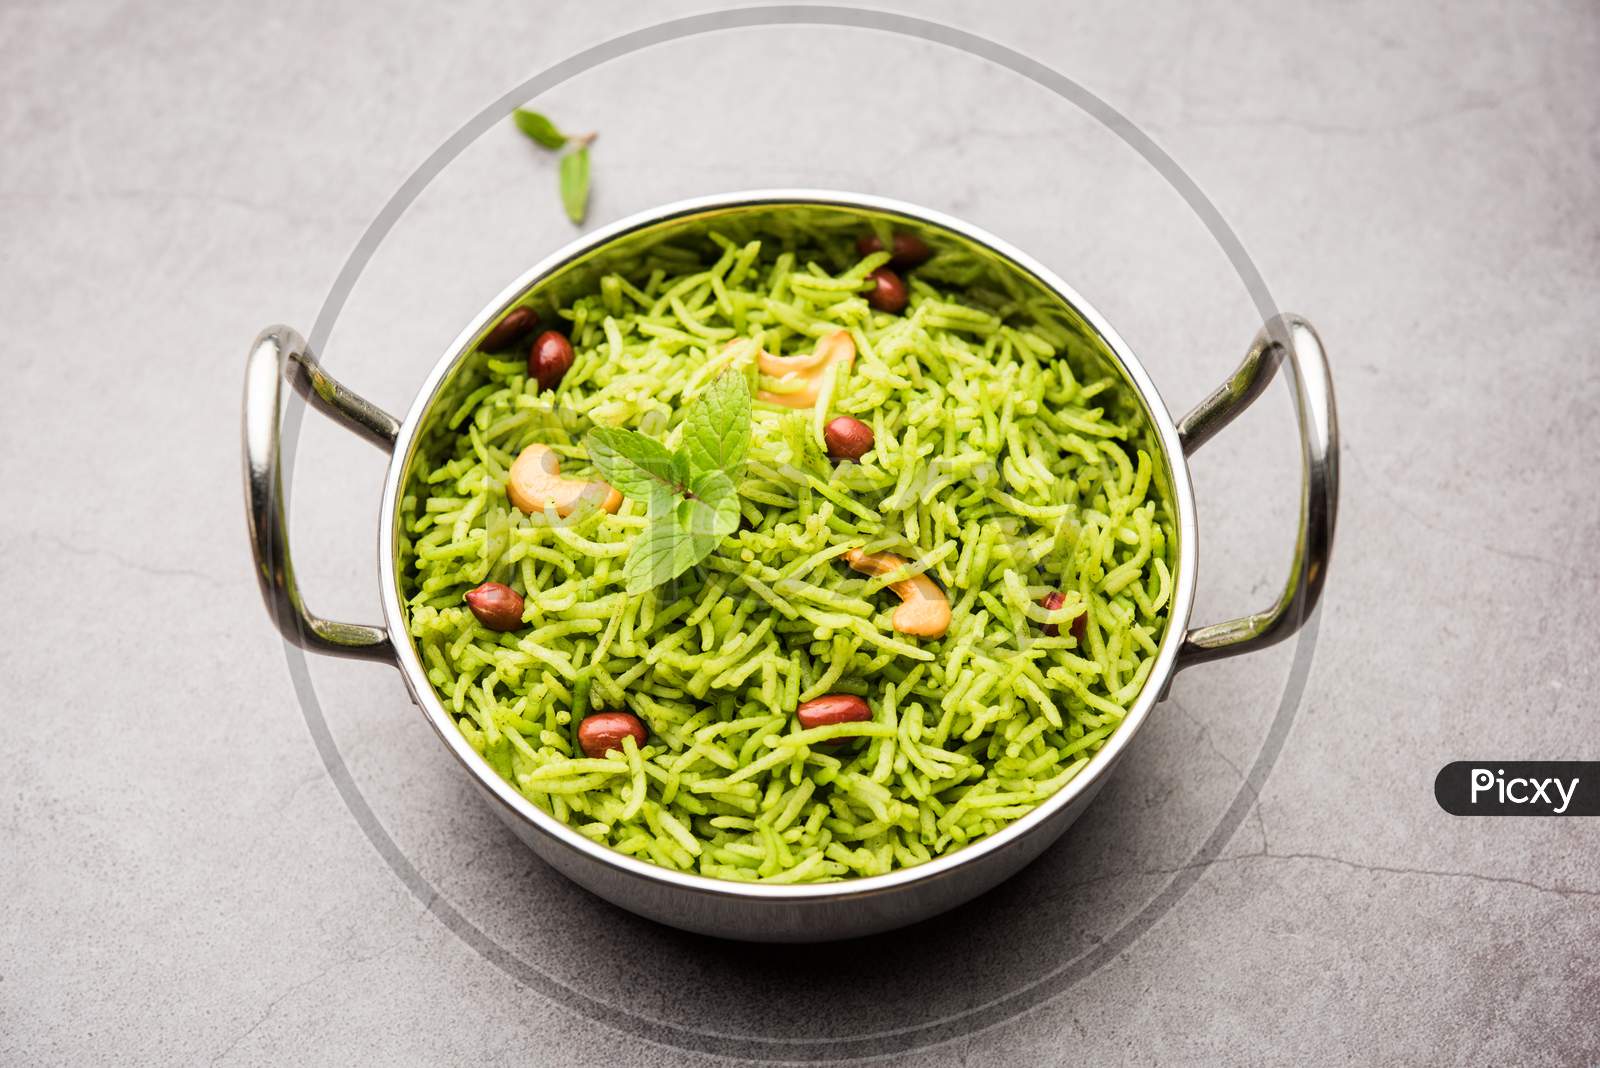 Mint Rice Or Pudina Flavoured Pulao, Served In A Bowl